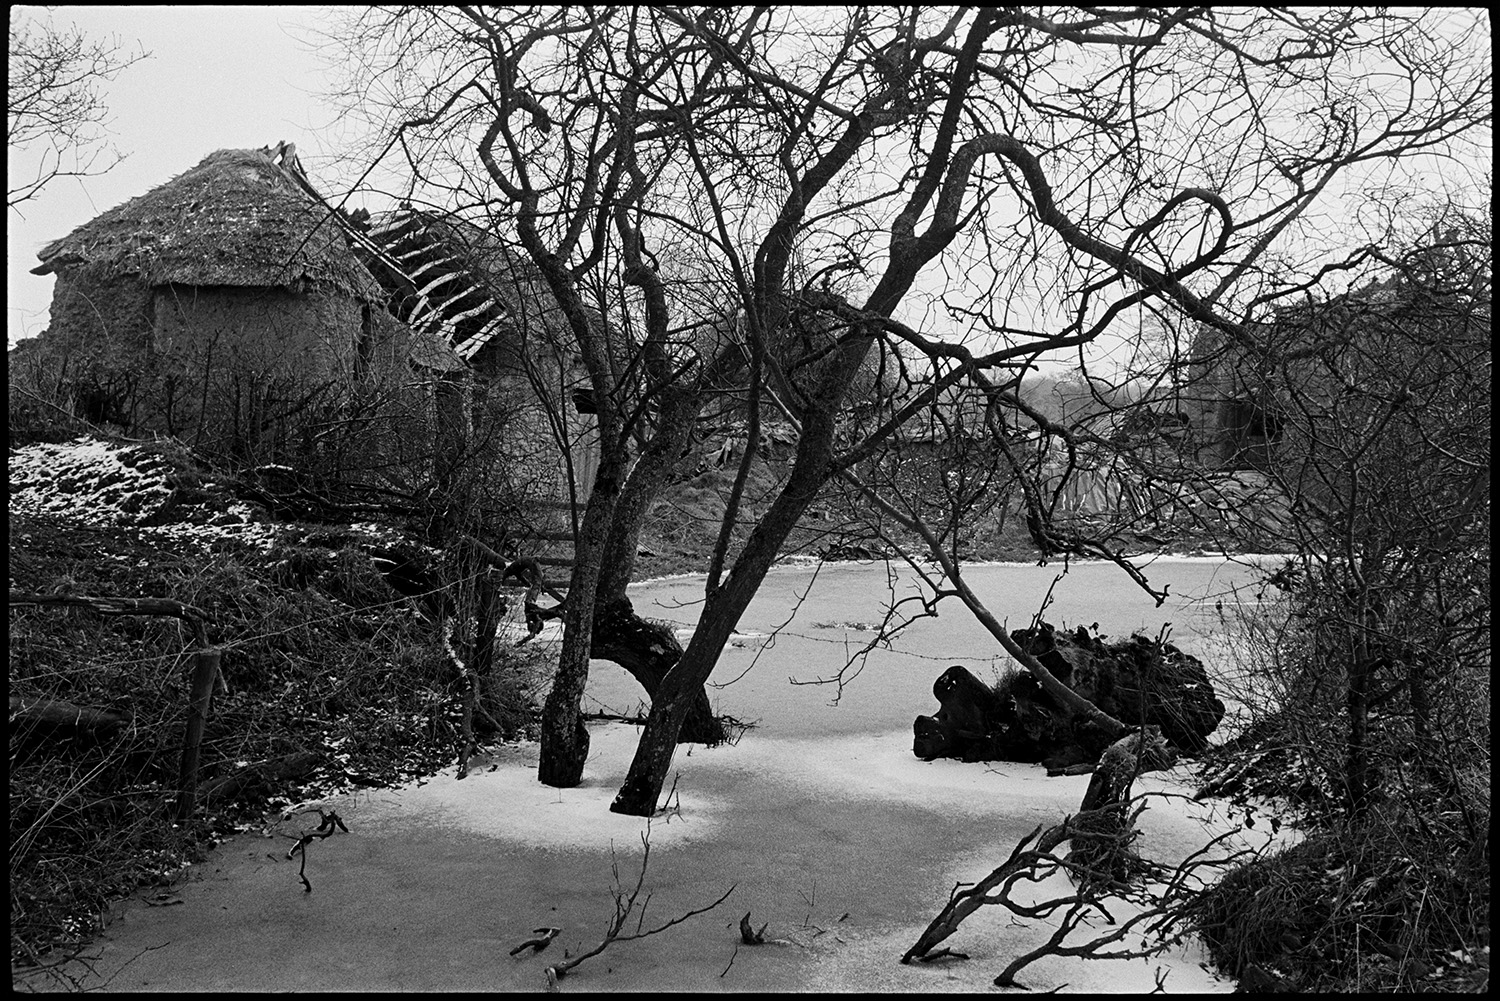 Ruined cob and thatch barns beside flooded stream. 
[A collapsing cob and thatch barn in a field by a flooded and frozen stream at Middle Week, Iddesleigh. The roof timbers of the barn are exposed and patches of snow can be seen in brambles. Tree trunks are also visible in the frozen stream.]